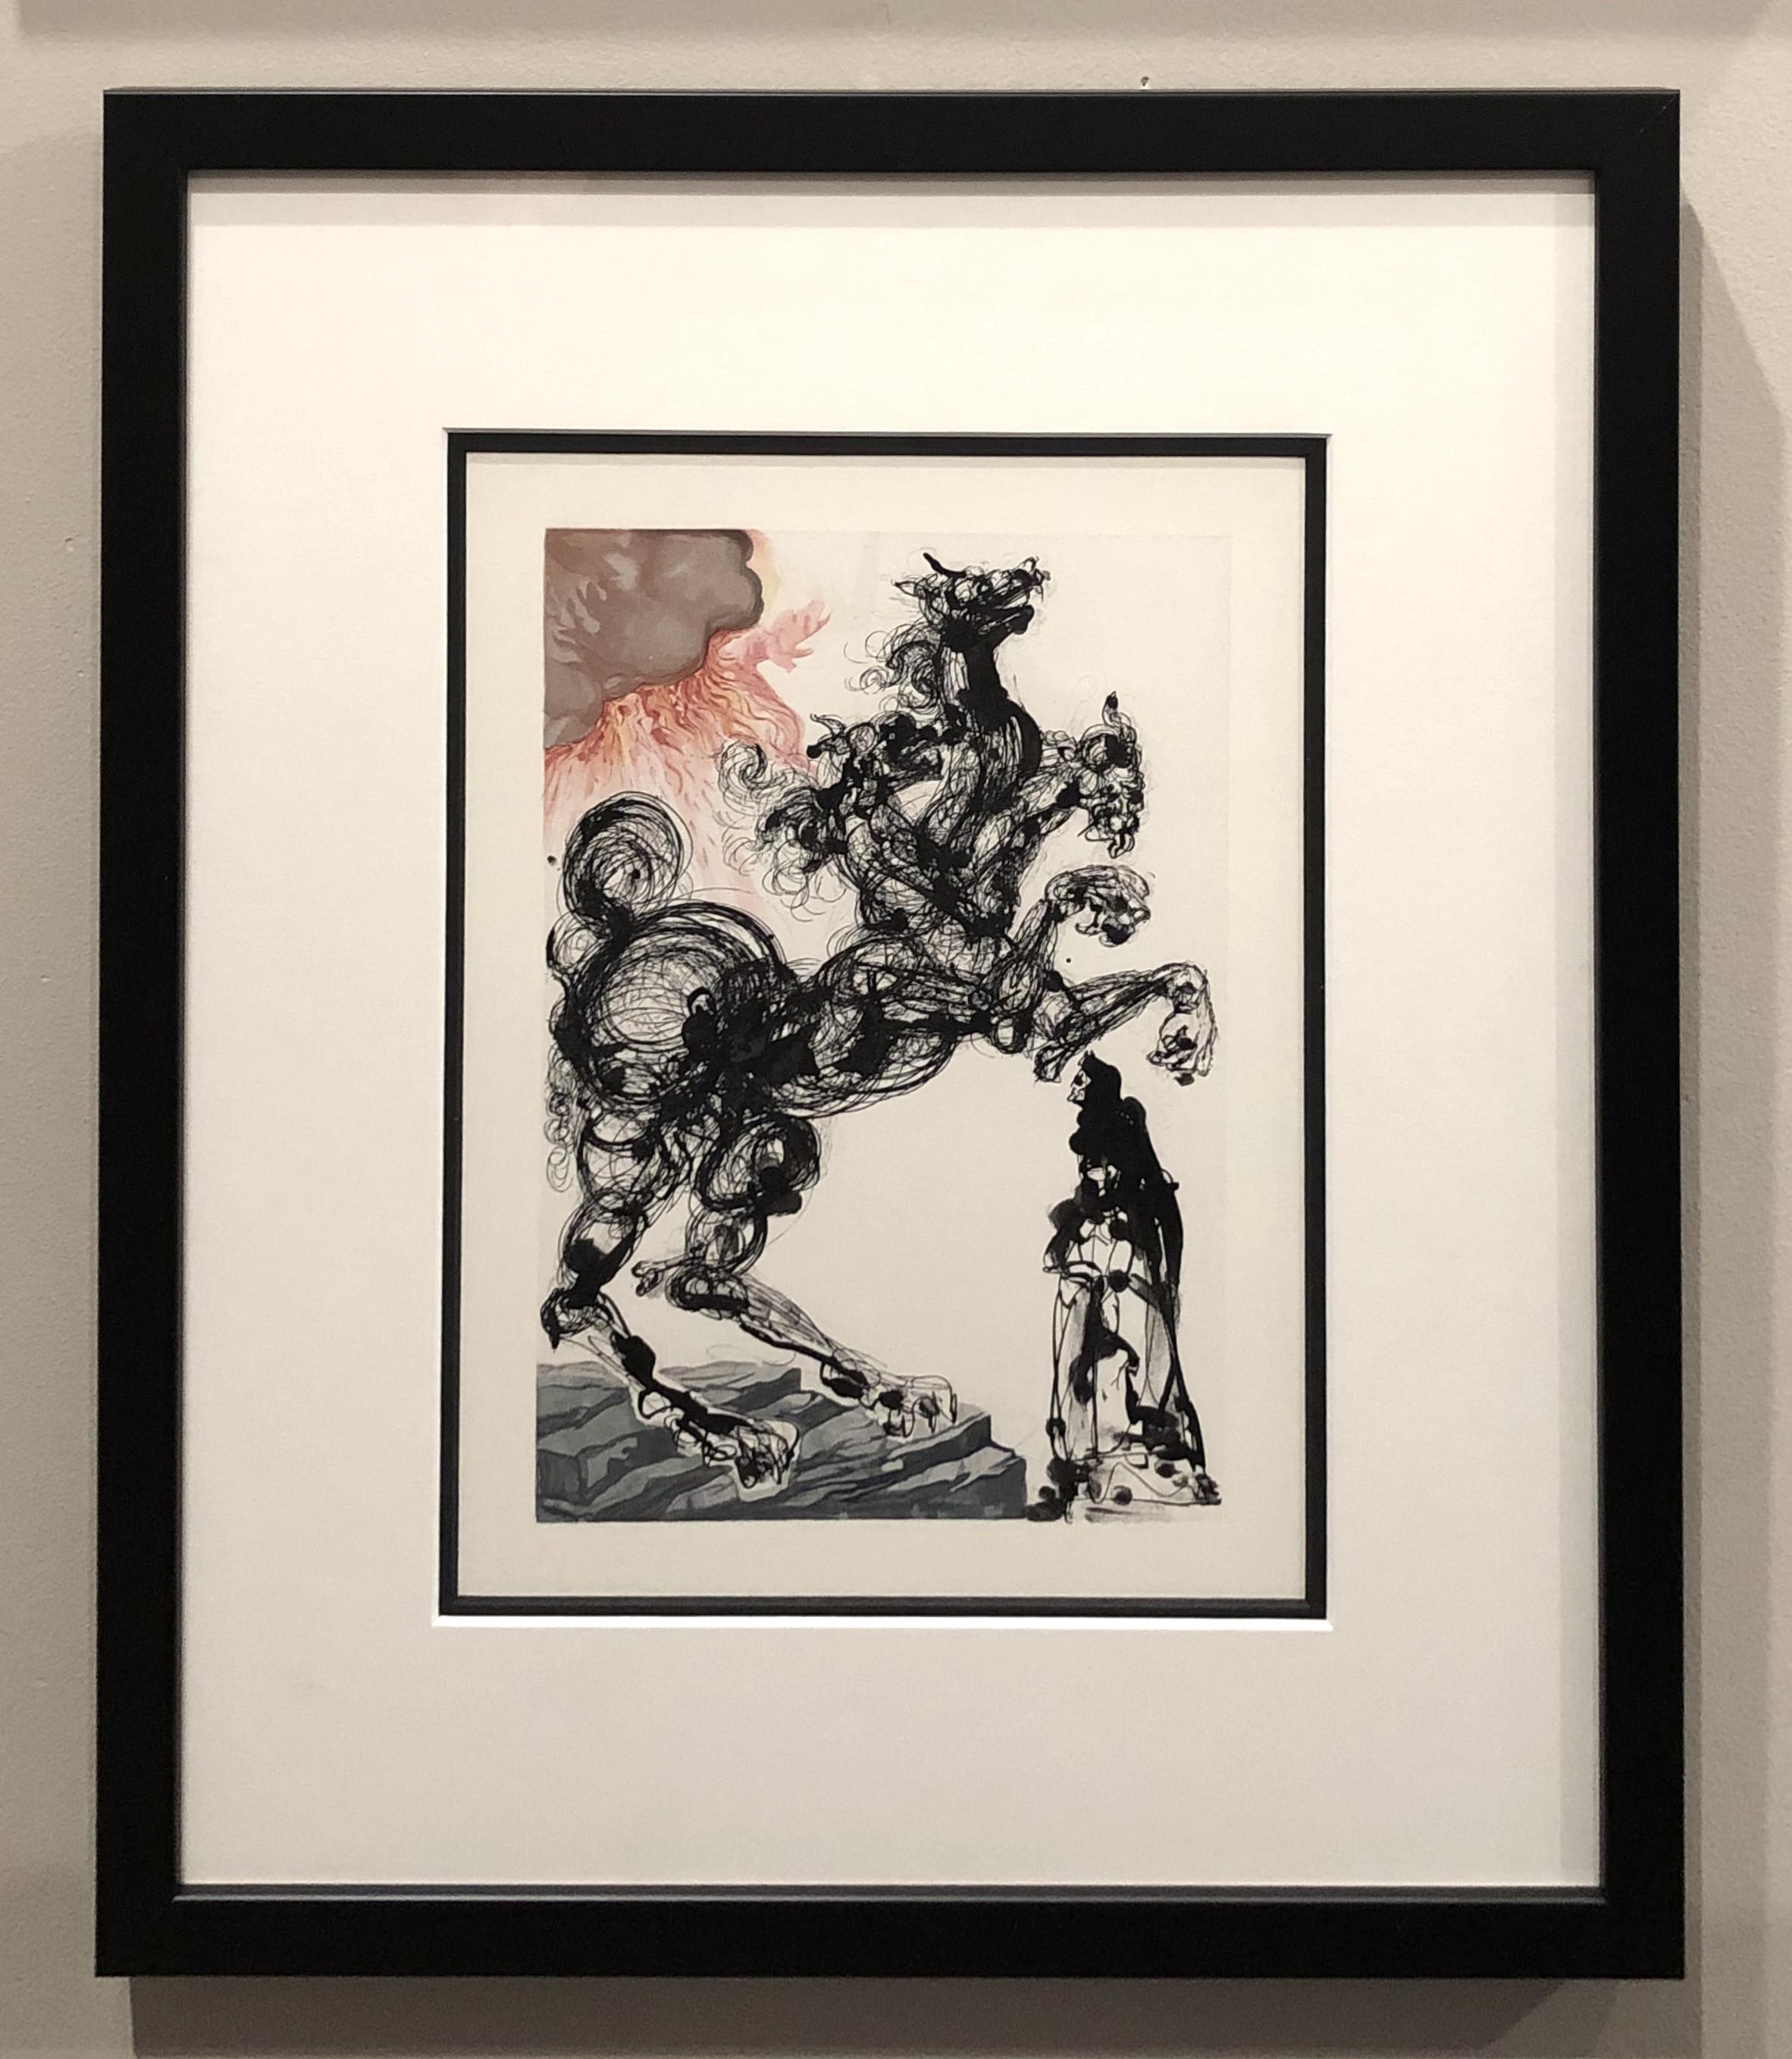 Salvador Dalí Landscape Print - Inferno: Canto 6, from The Divine Comedy